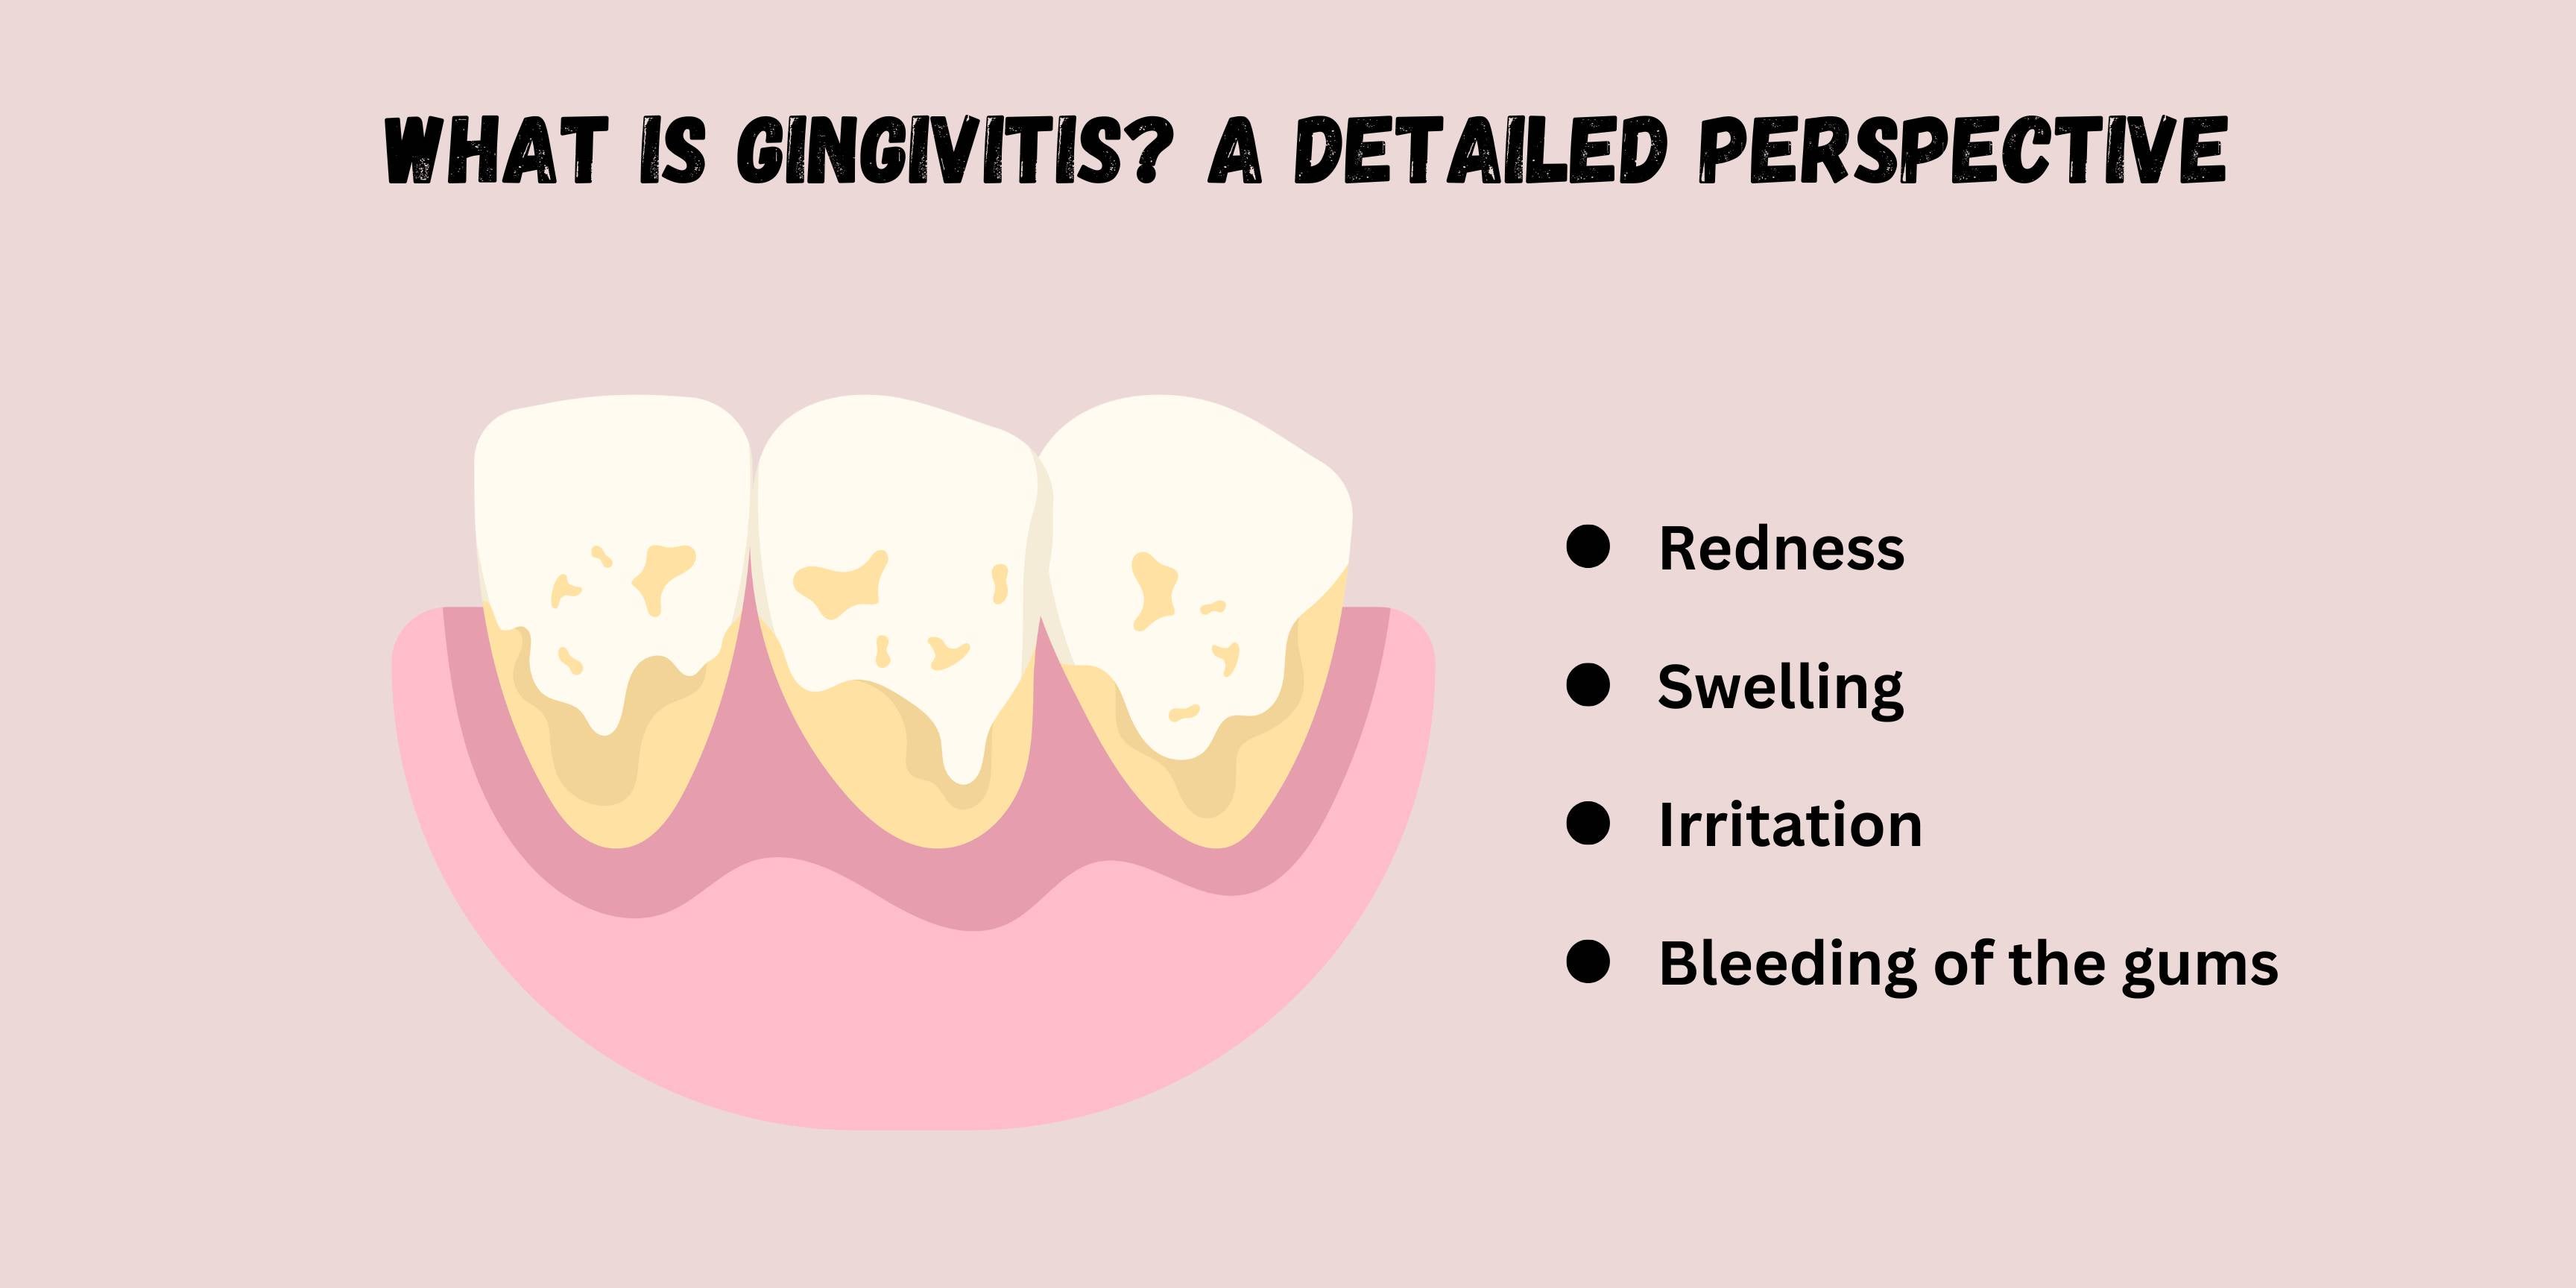 What is Gingivitis A Detailed Perspective